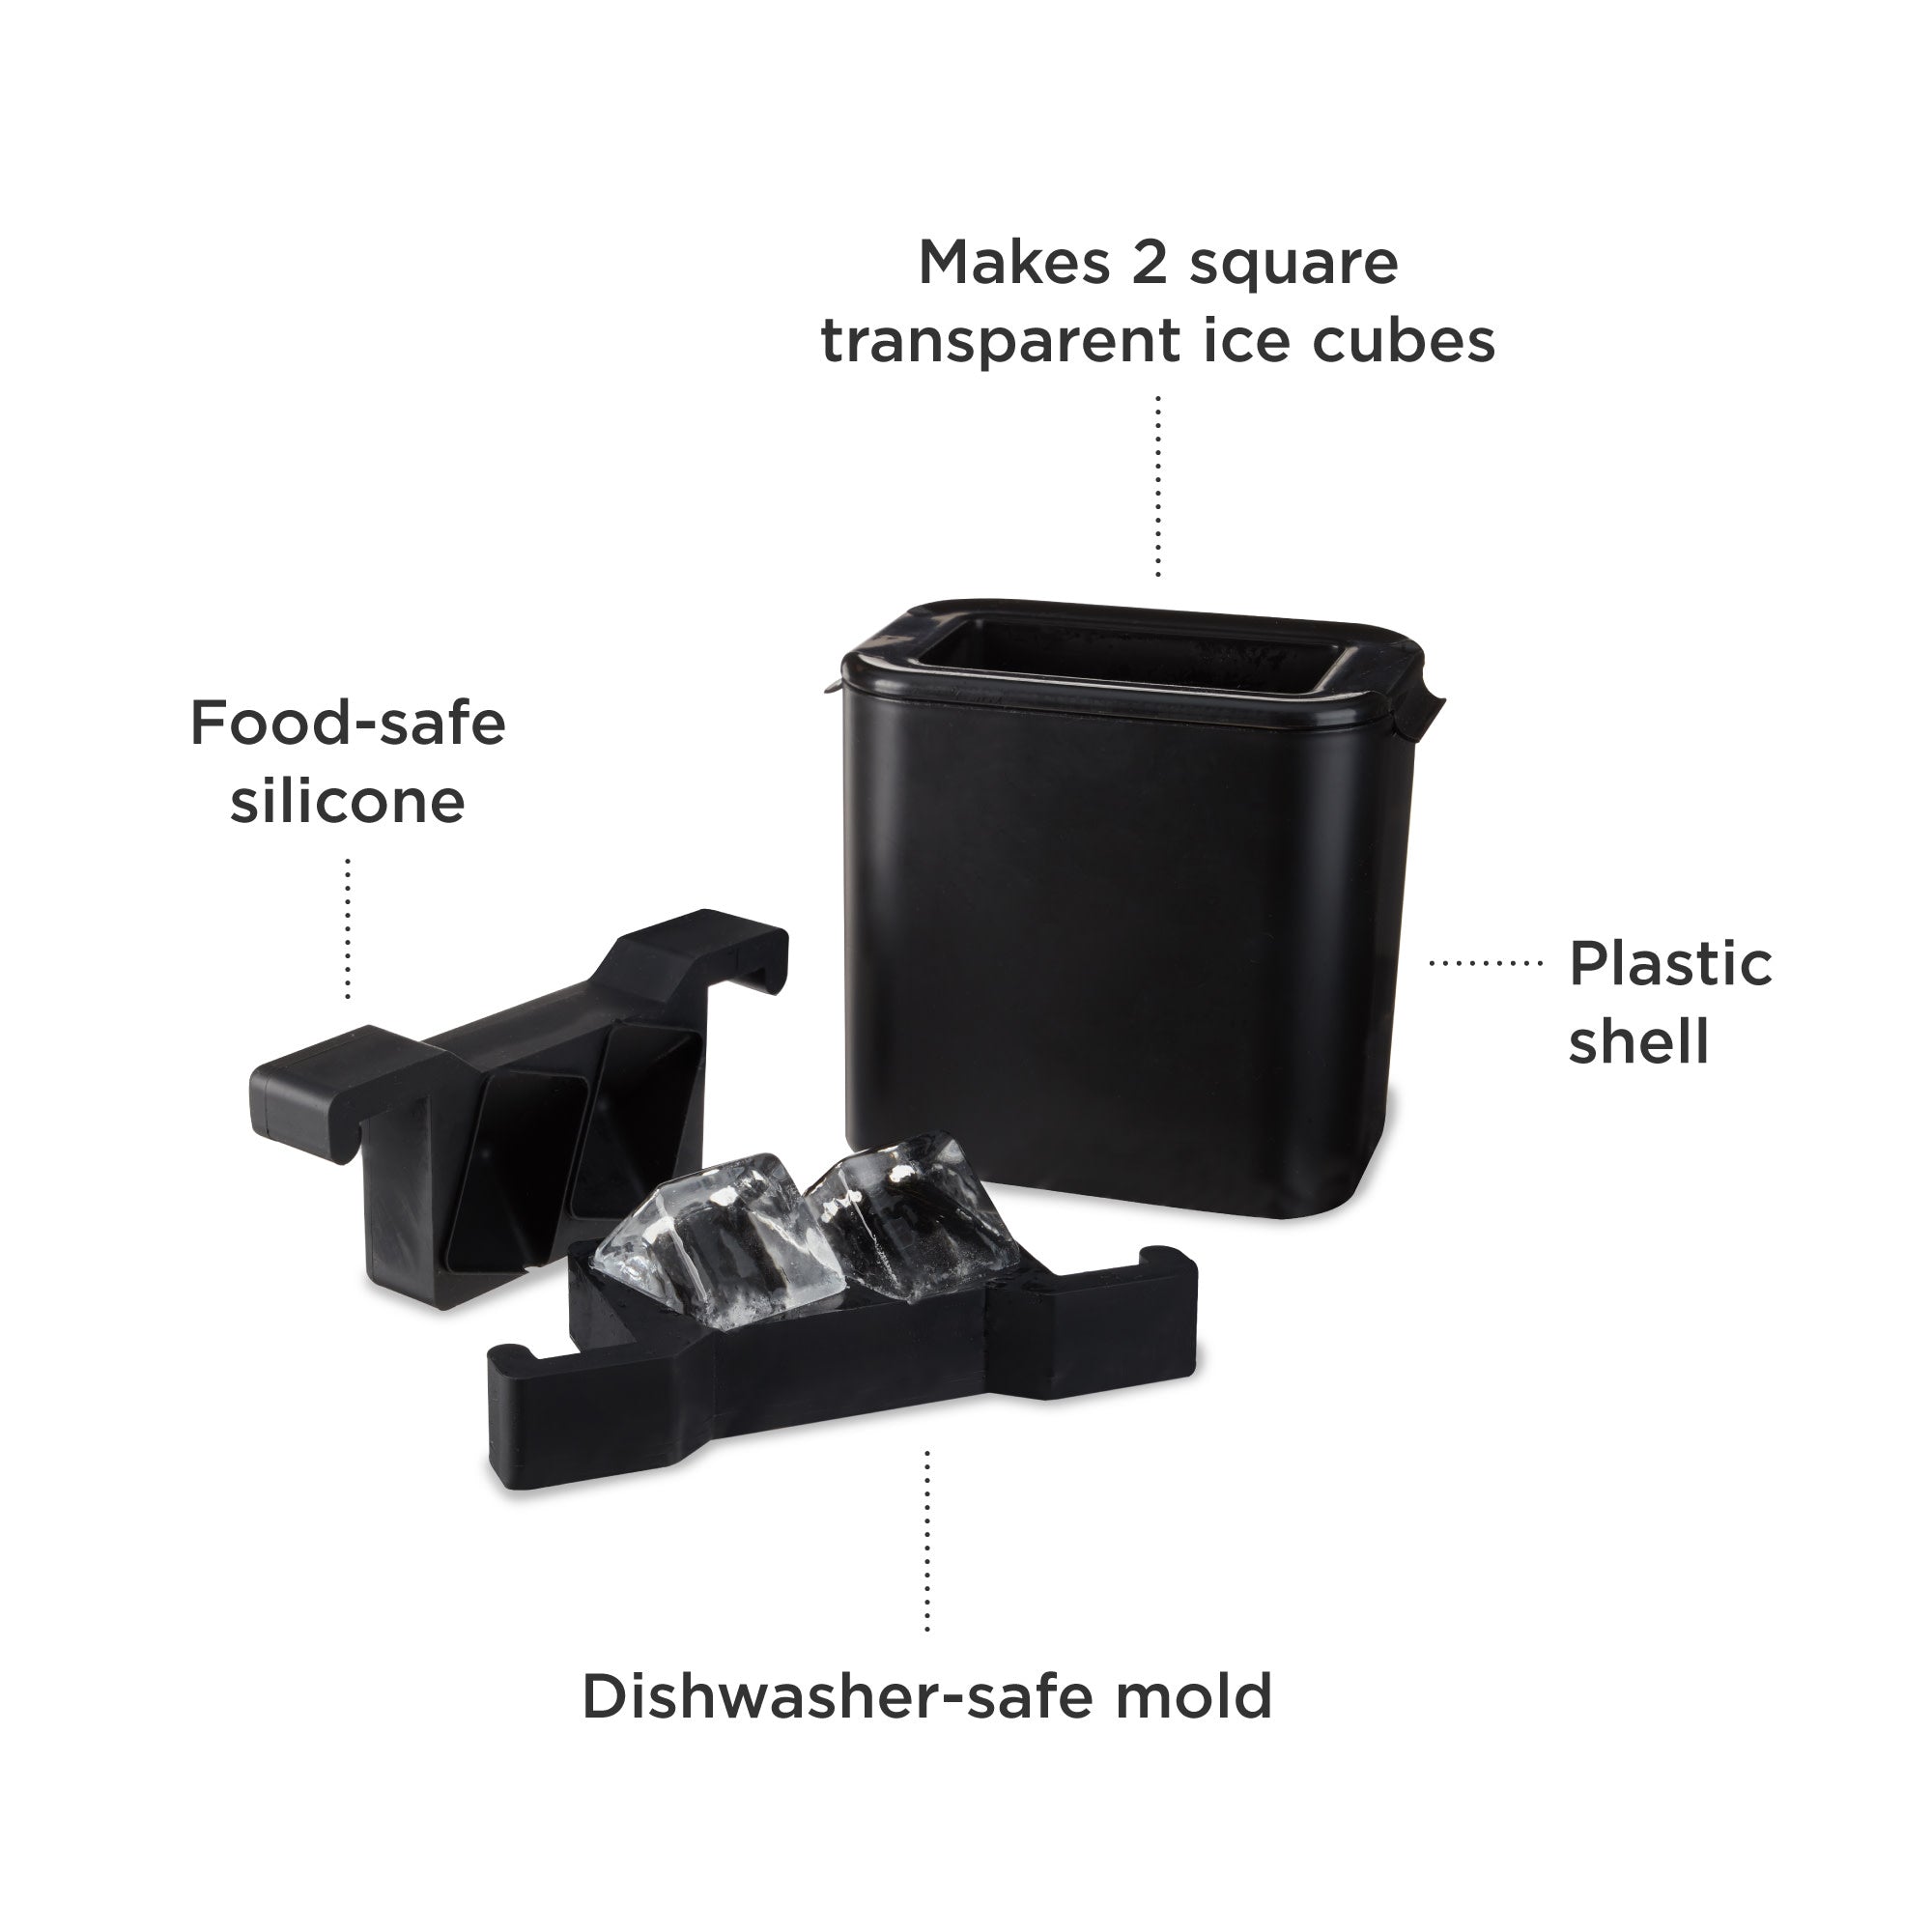 The Clear Ice Maker – craftklaris